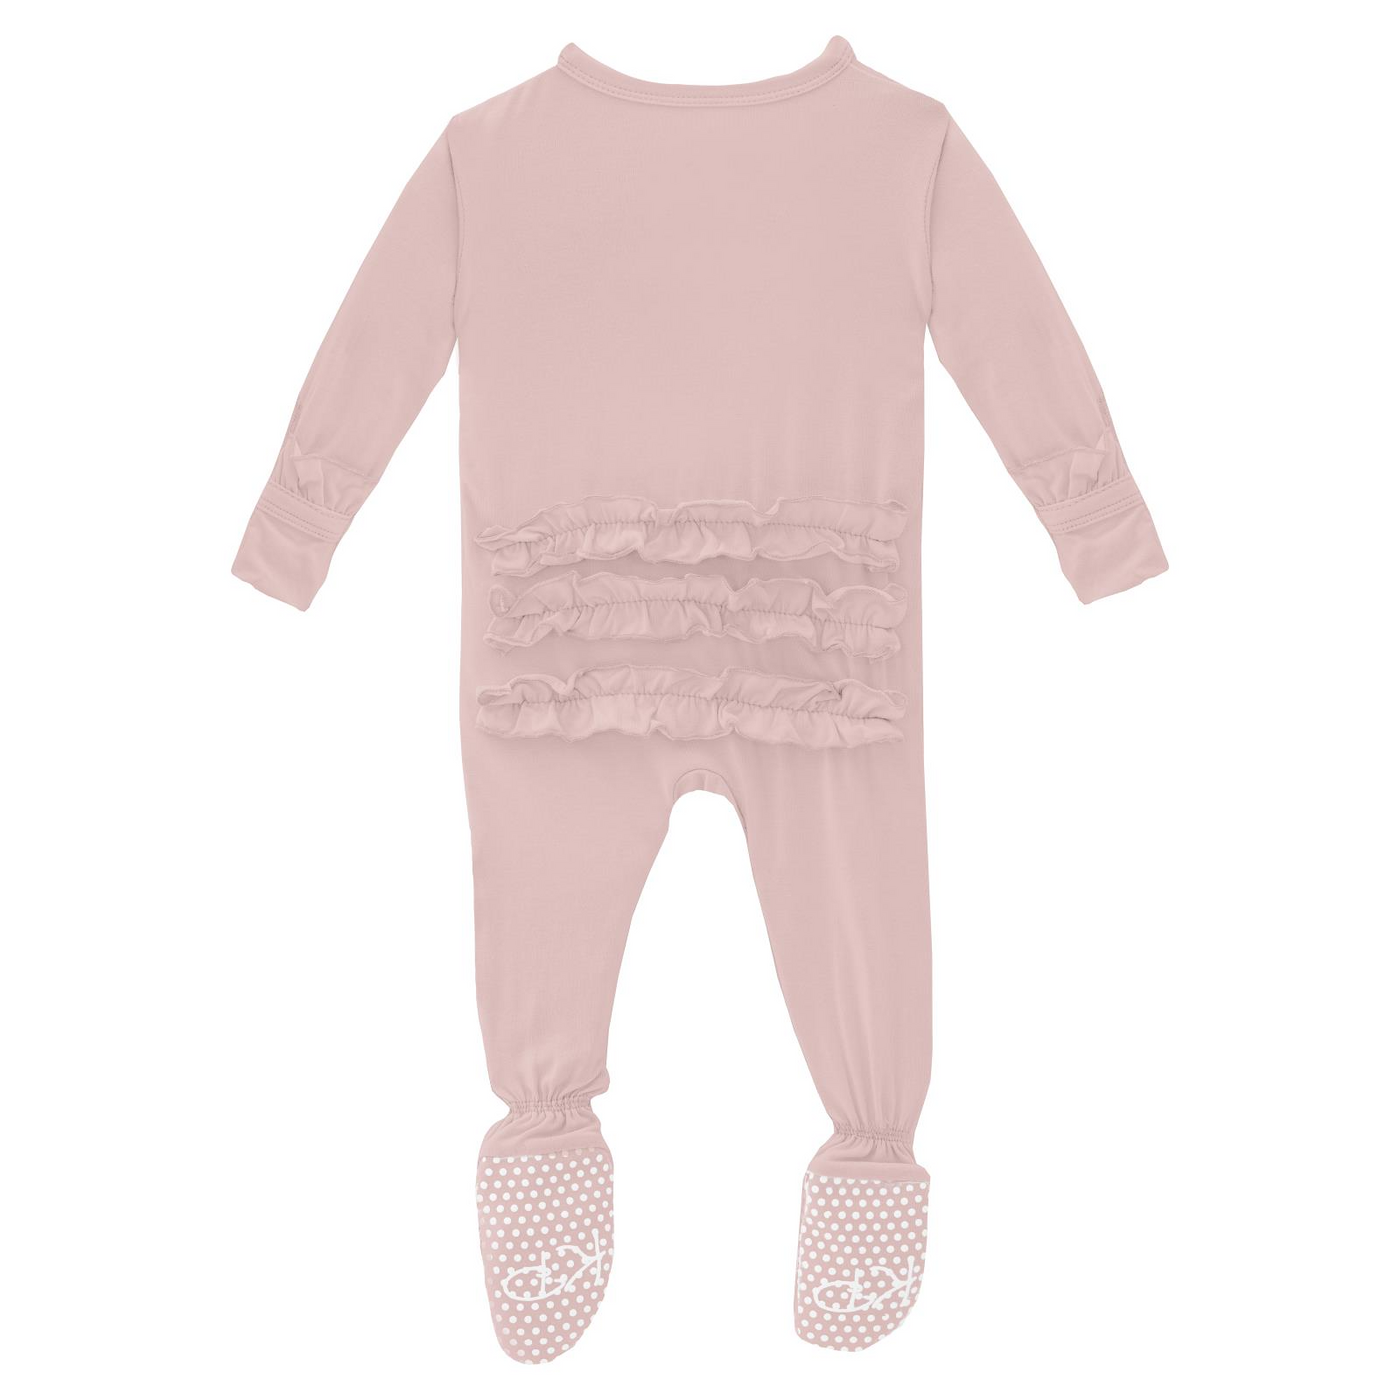 Kickee Pants Classic Ruffle Footie with 2 Way Zipper: Solid Baby Rose